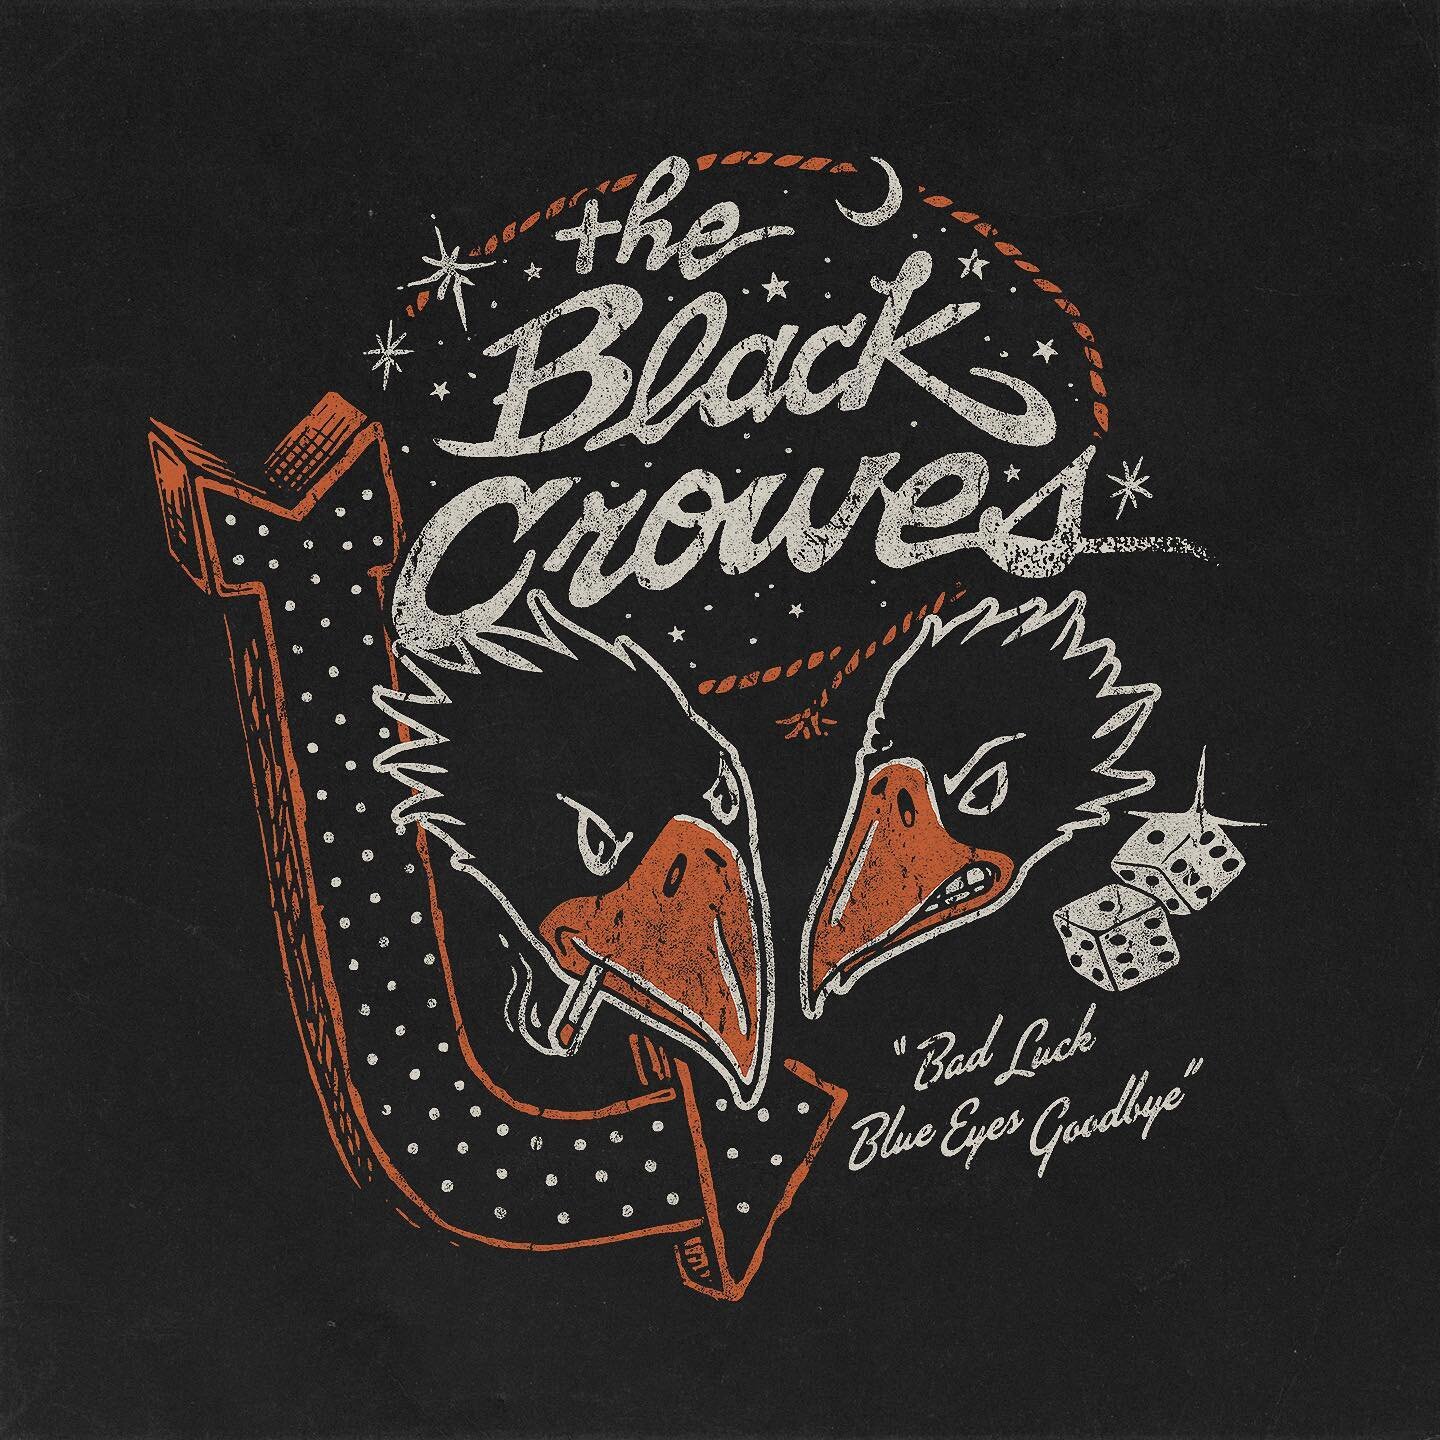 A little bit of bad luck for The Black Crowes. This was sold at their Vegas shows earlier this year and is now available on their web store!